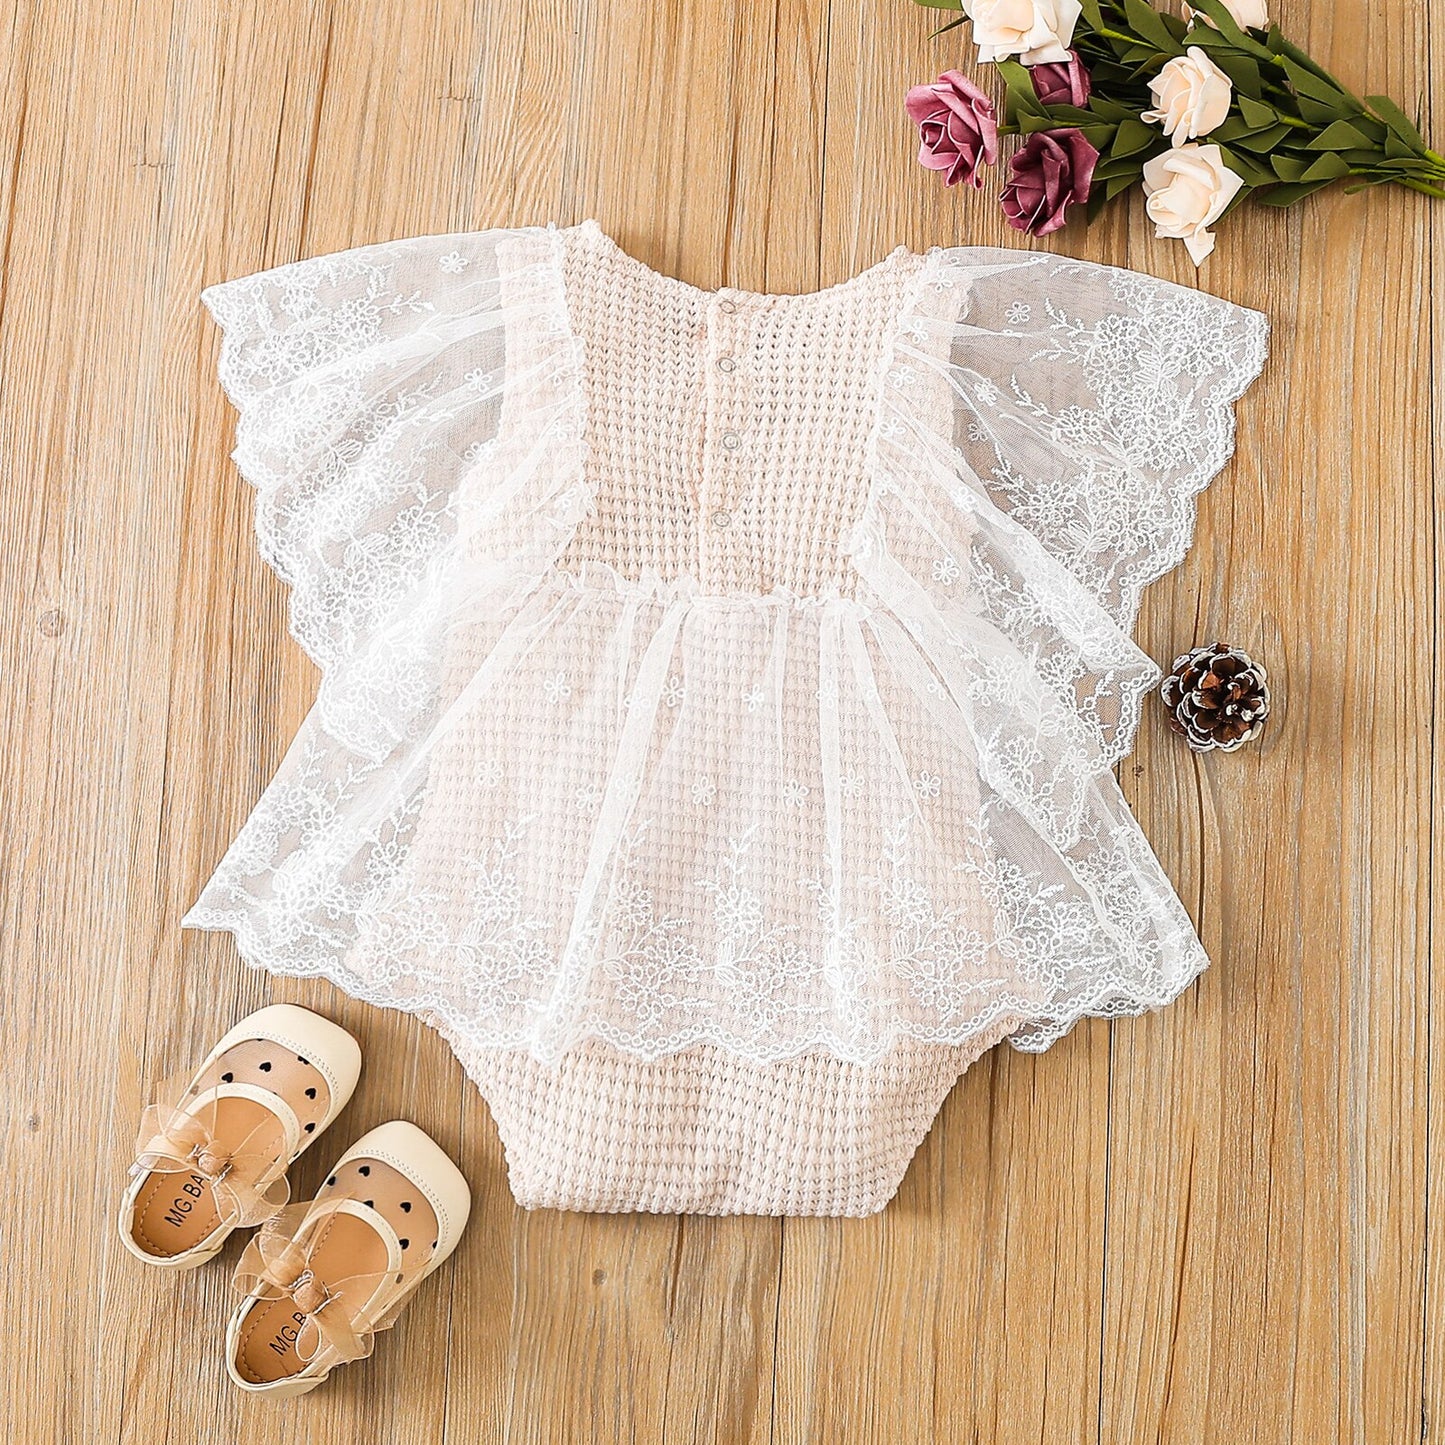 Lace Floral Ruffle Romper